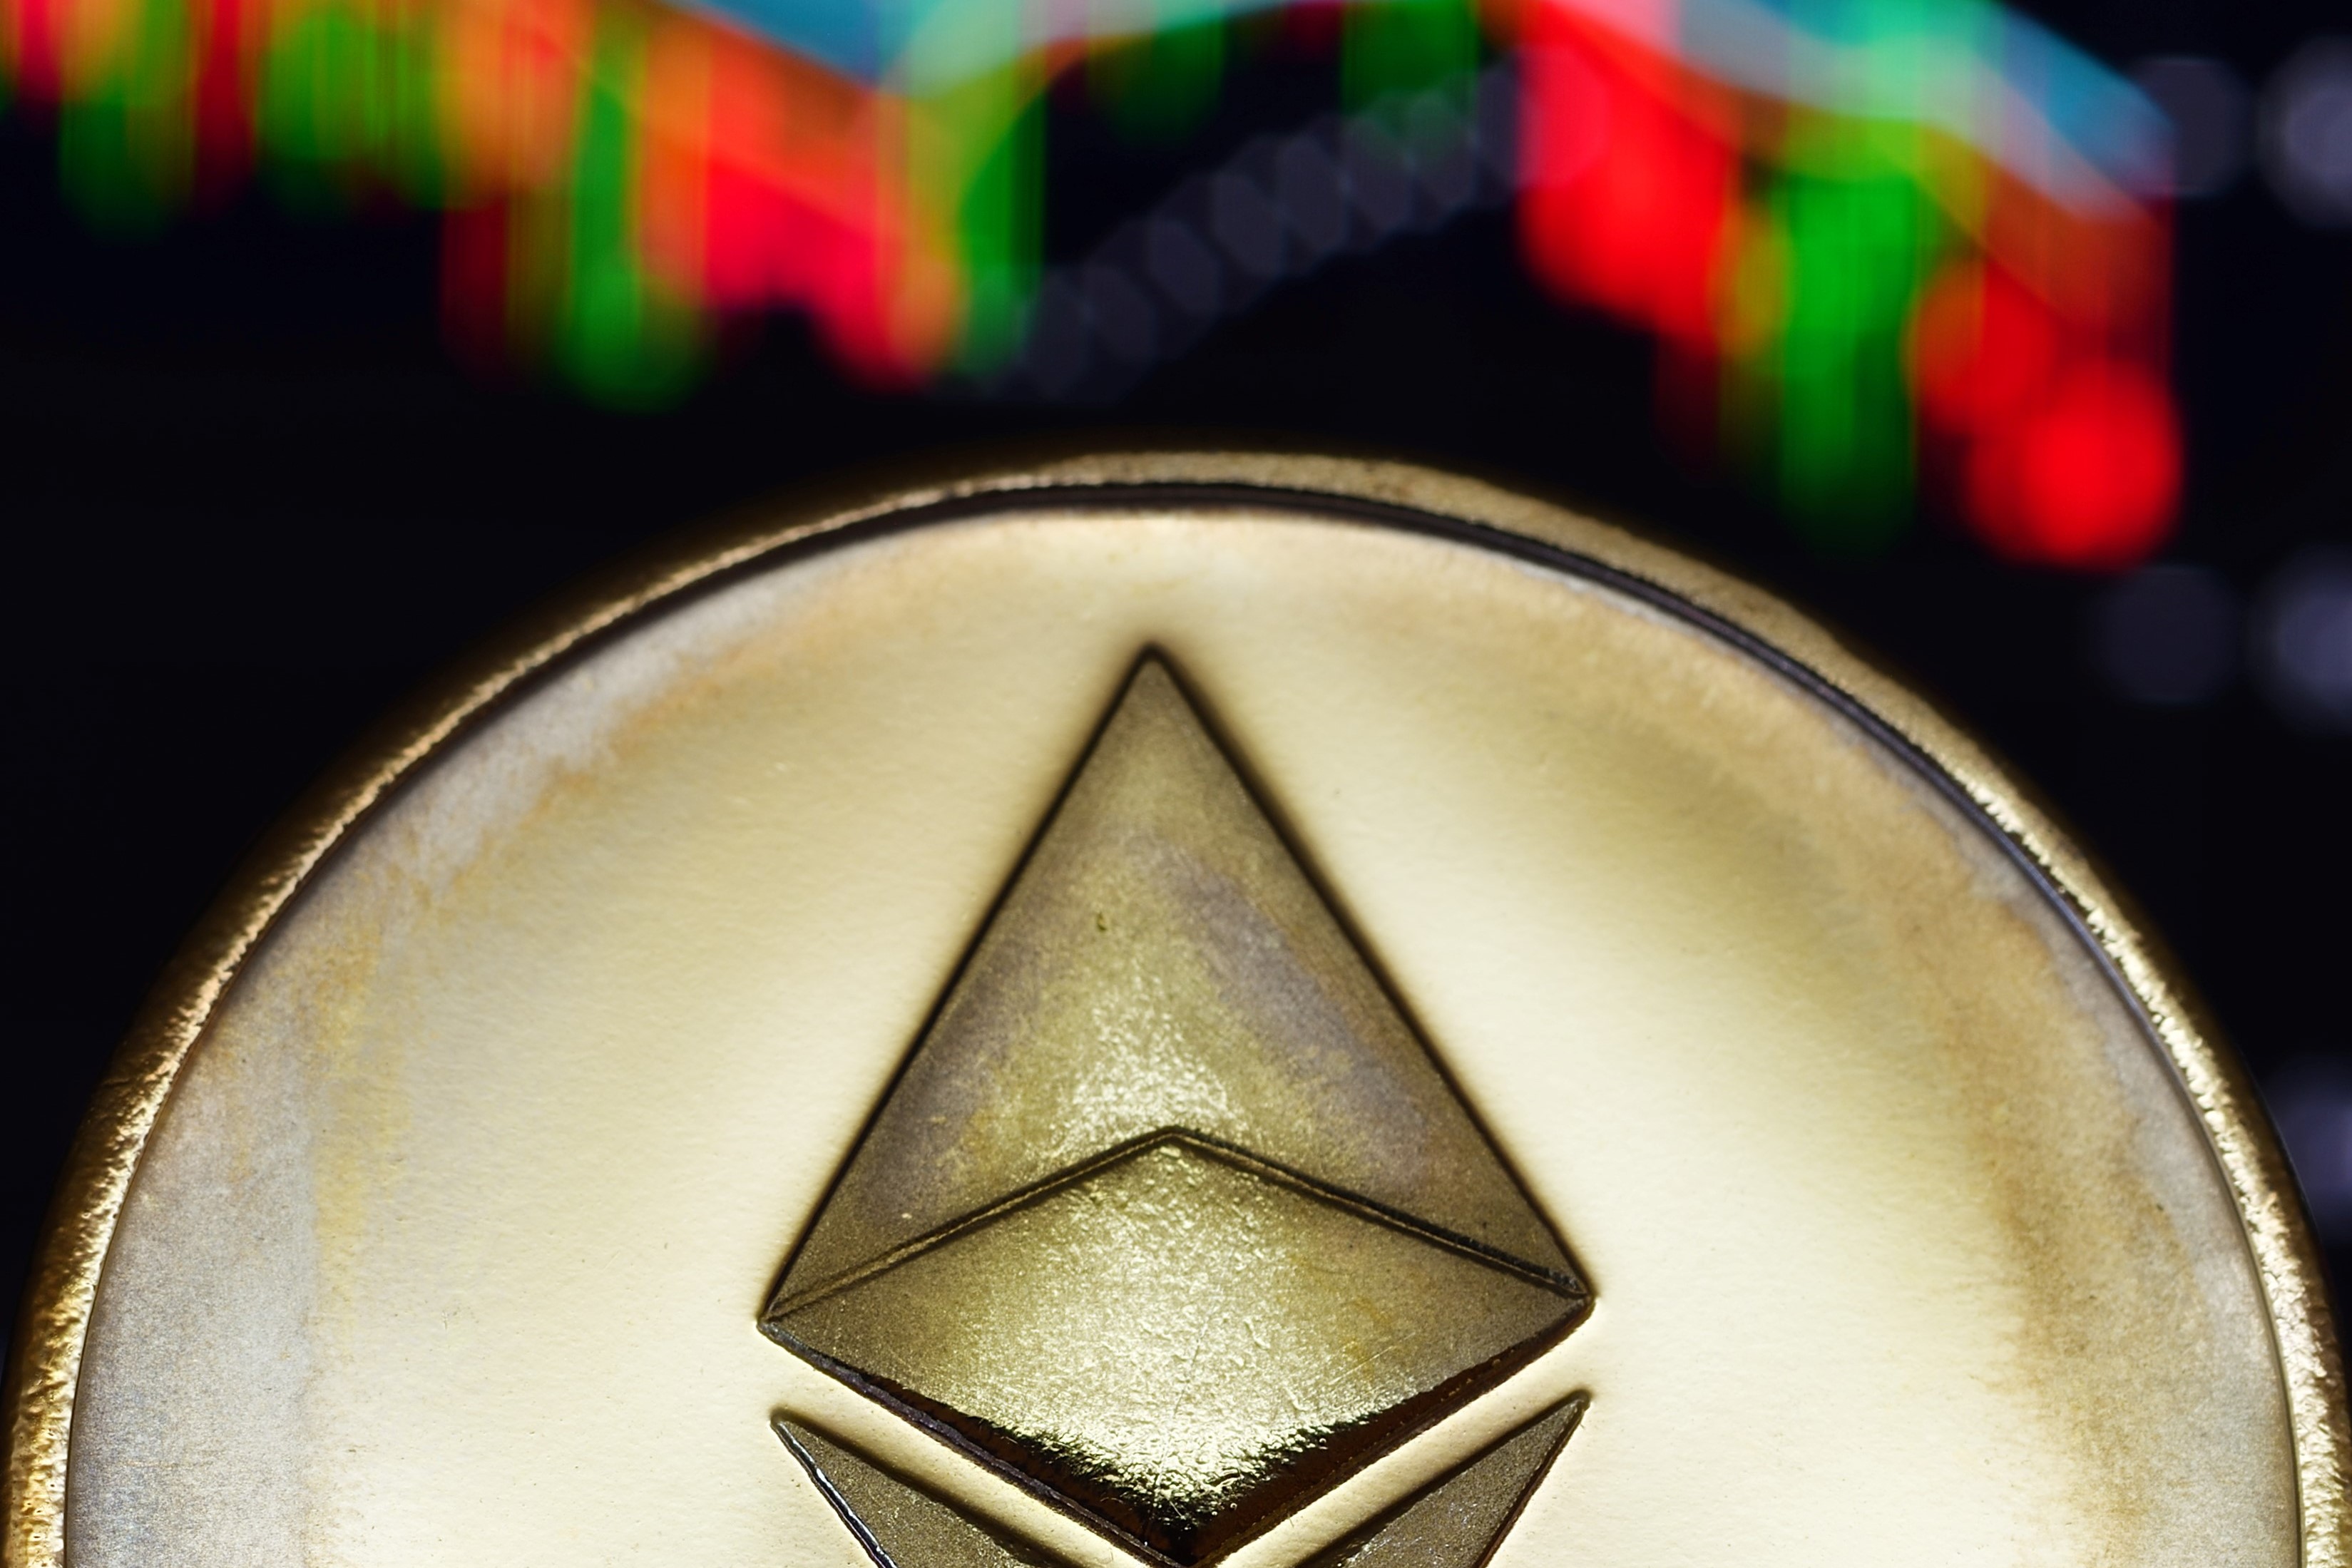 Report: Ethereum Price May Have Plummeted Because of EOS